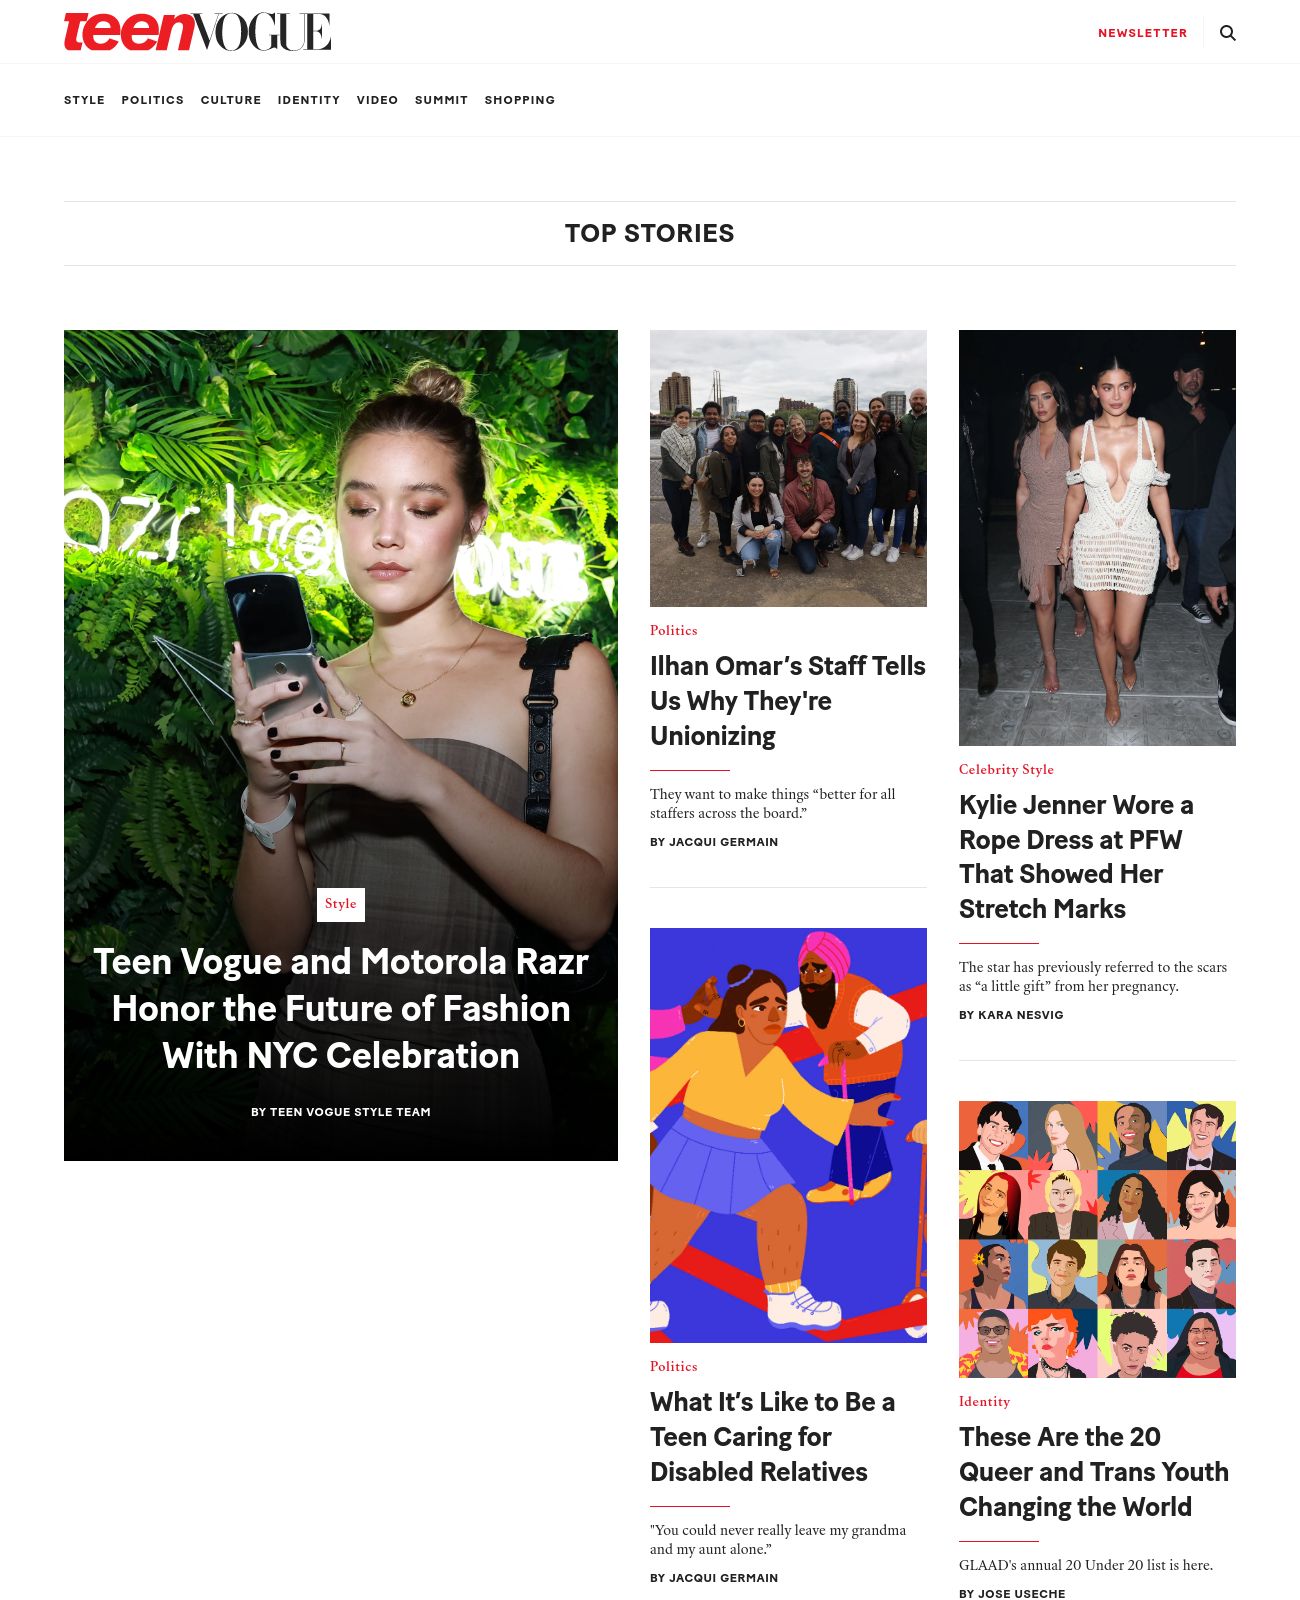 Teen Vogue at 2022-09-30 23:48:39-04:00 local time